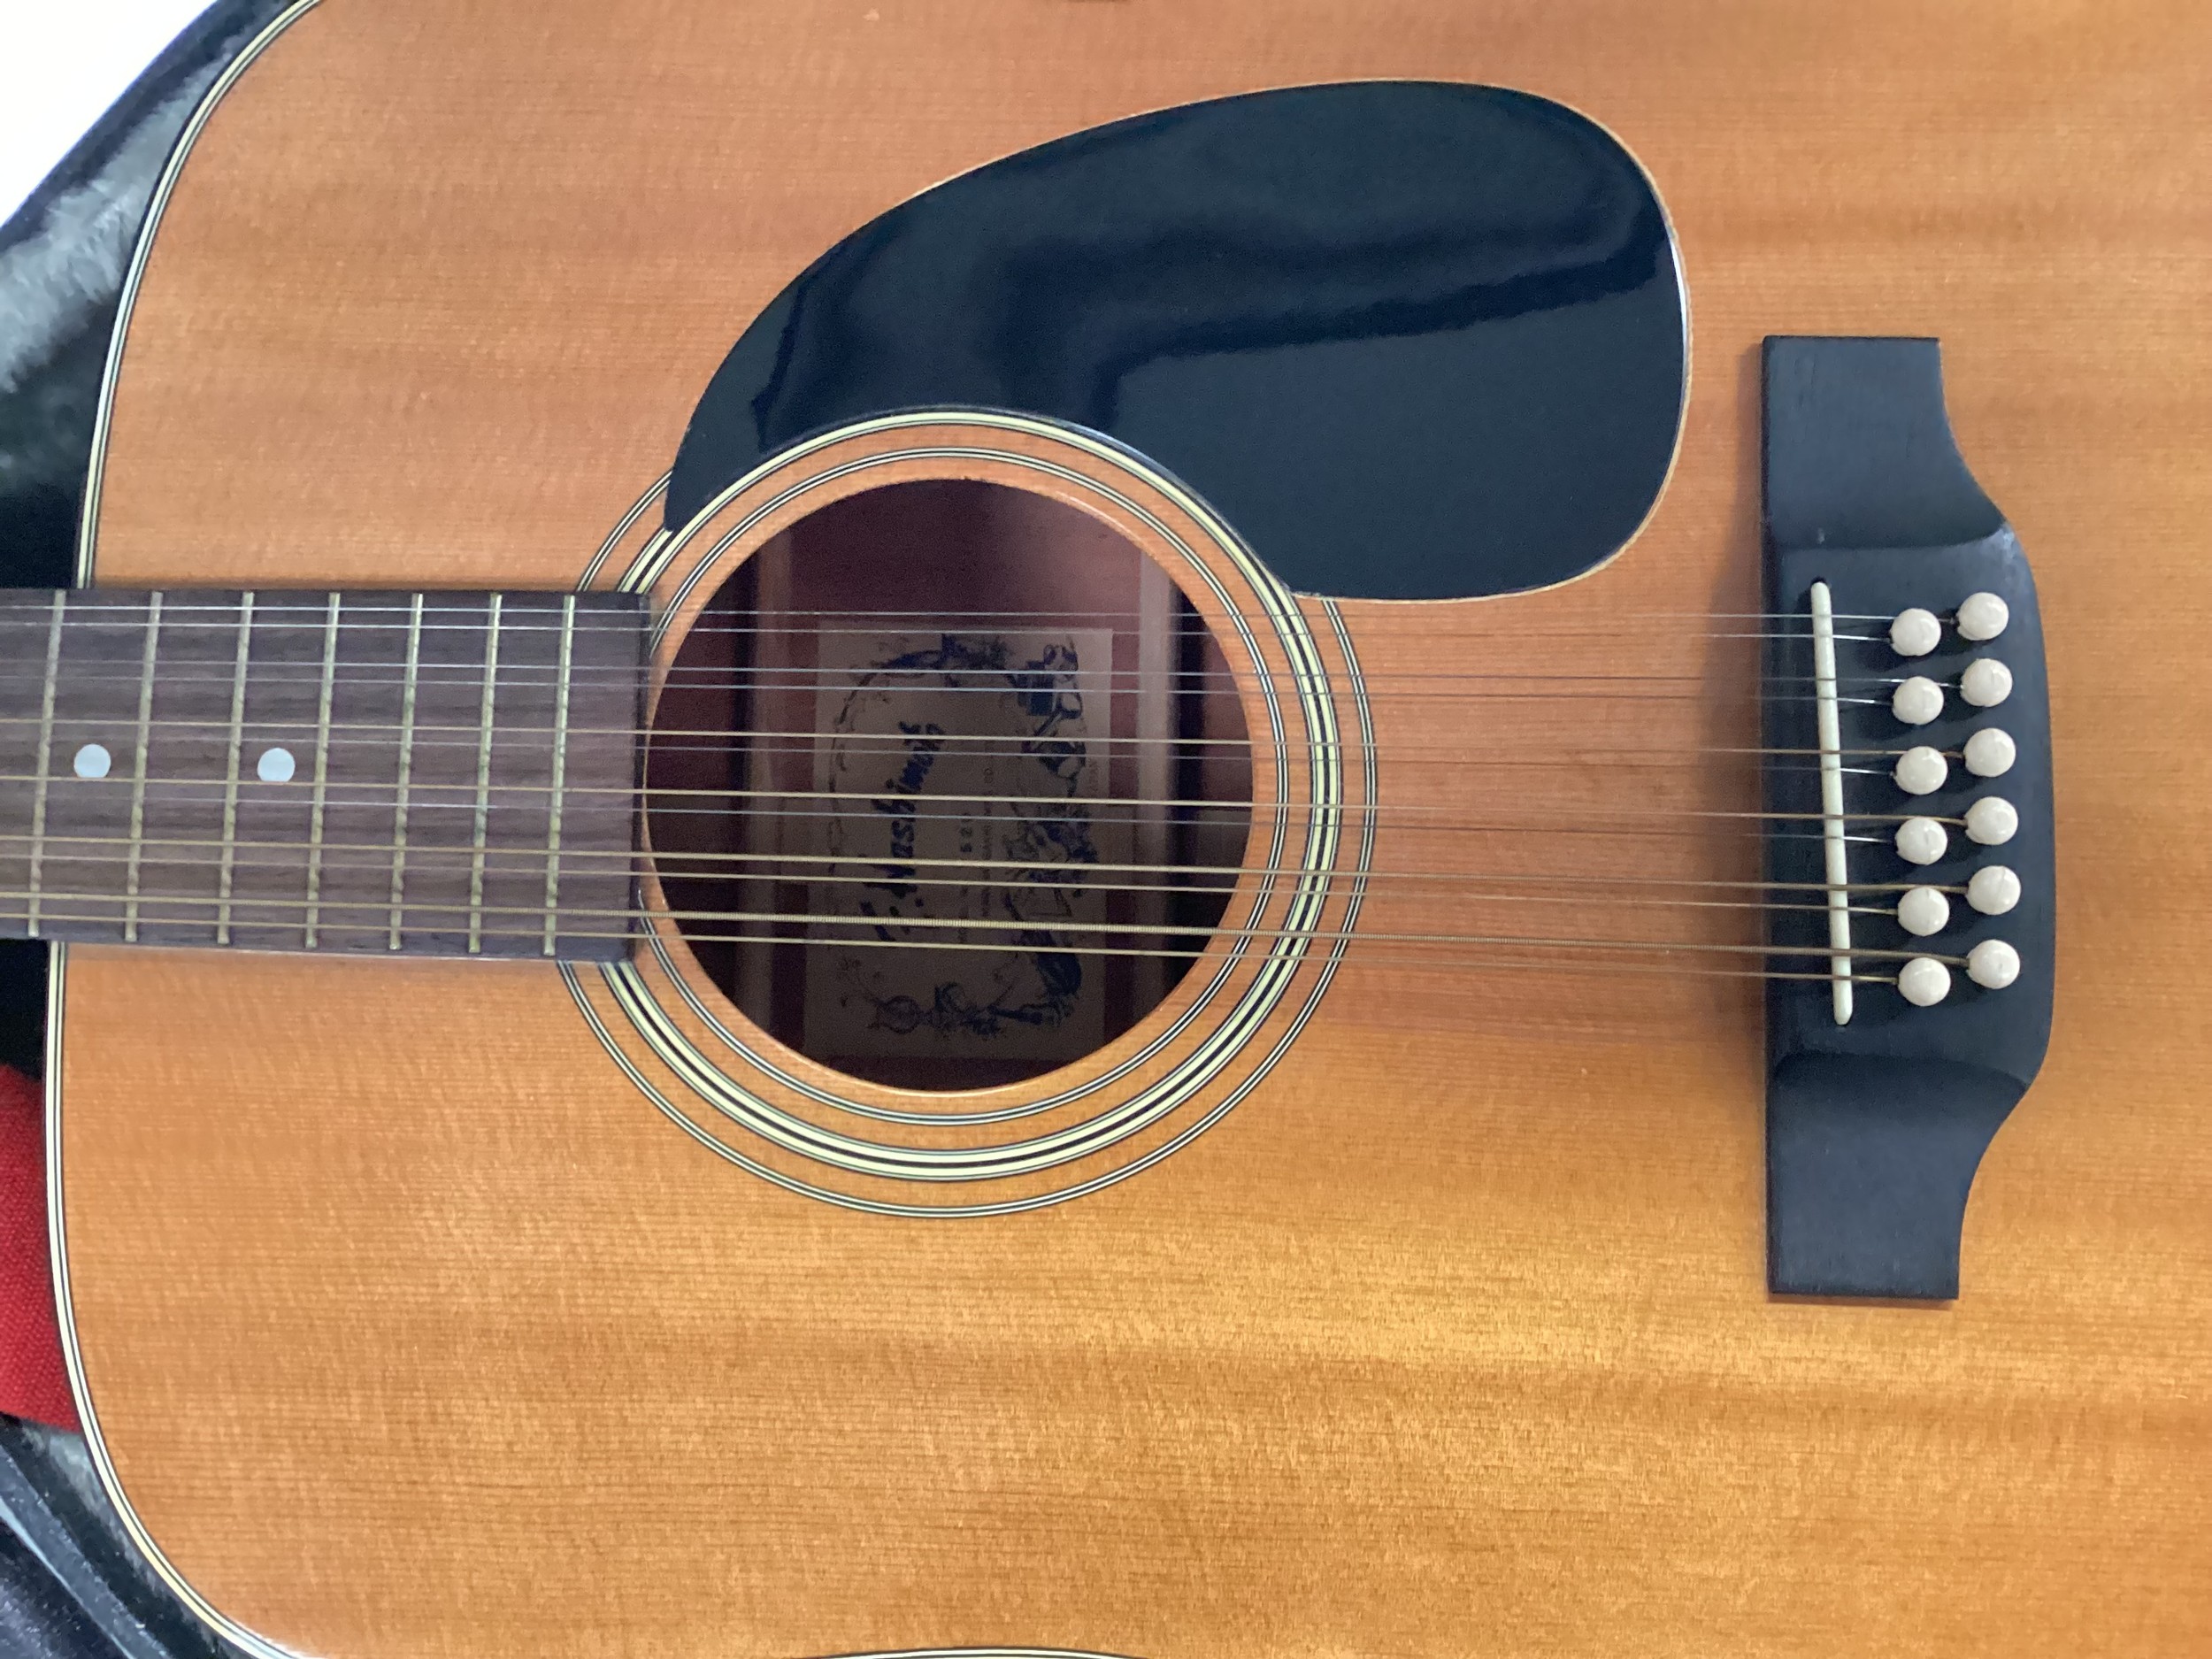 F HASHIMOTO DREADNOUGHT GUITAR. This is a right handed 12 string guitar with model No. T.520 made in - Bild 8 aus 9